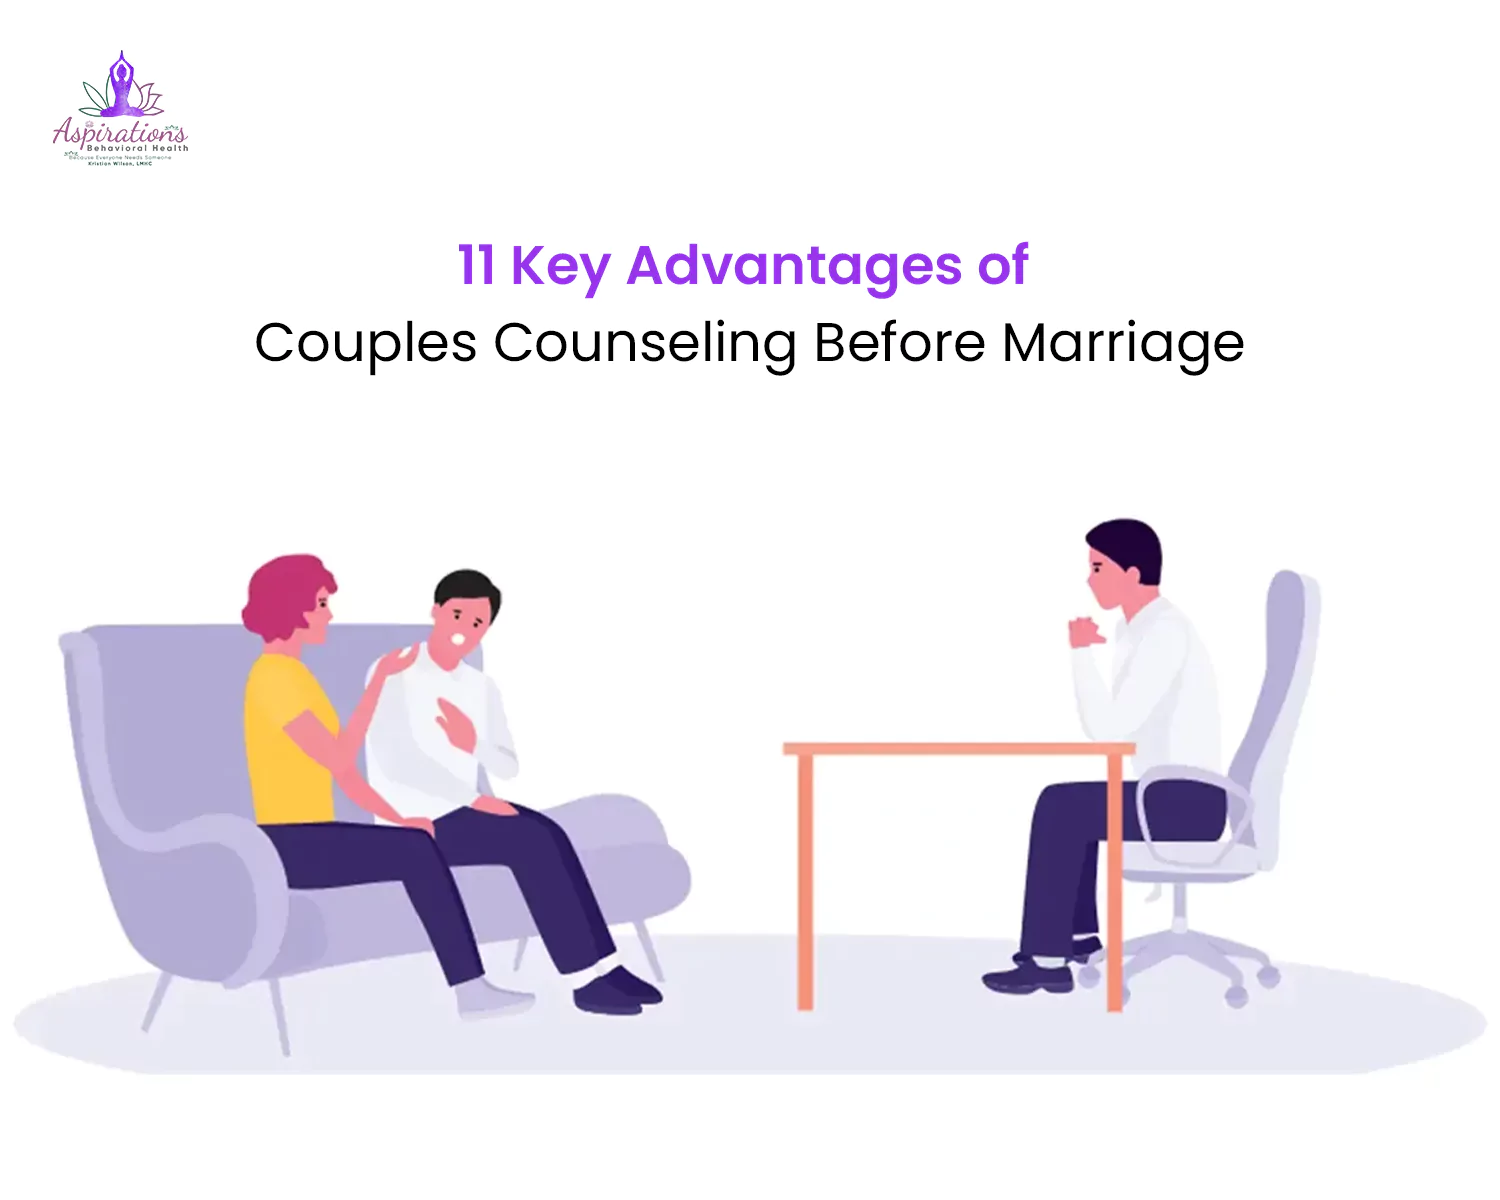 11 Key Advantages of Couples Counseling Before Marriage